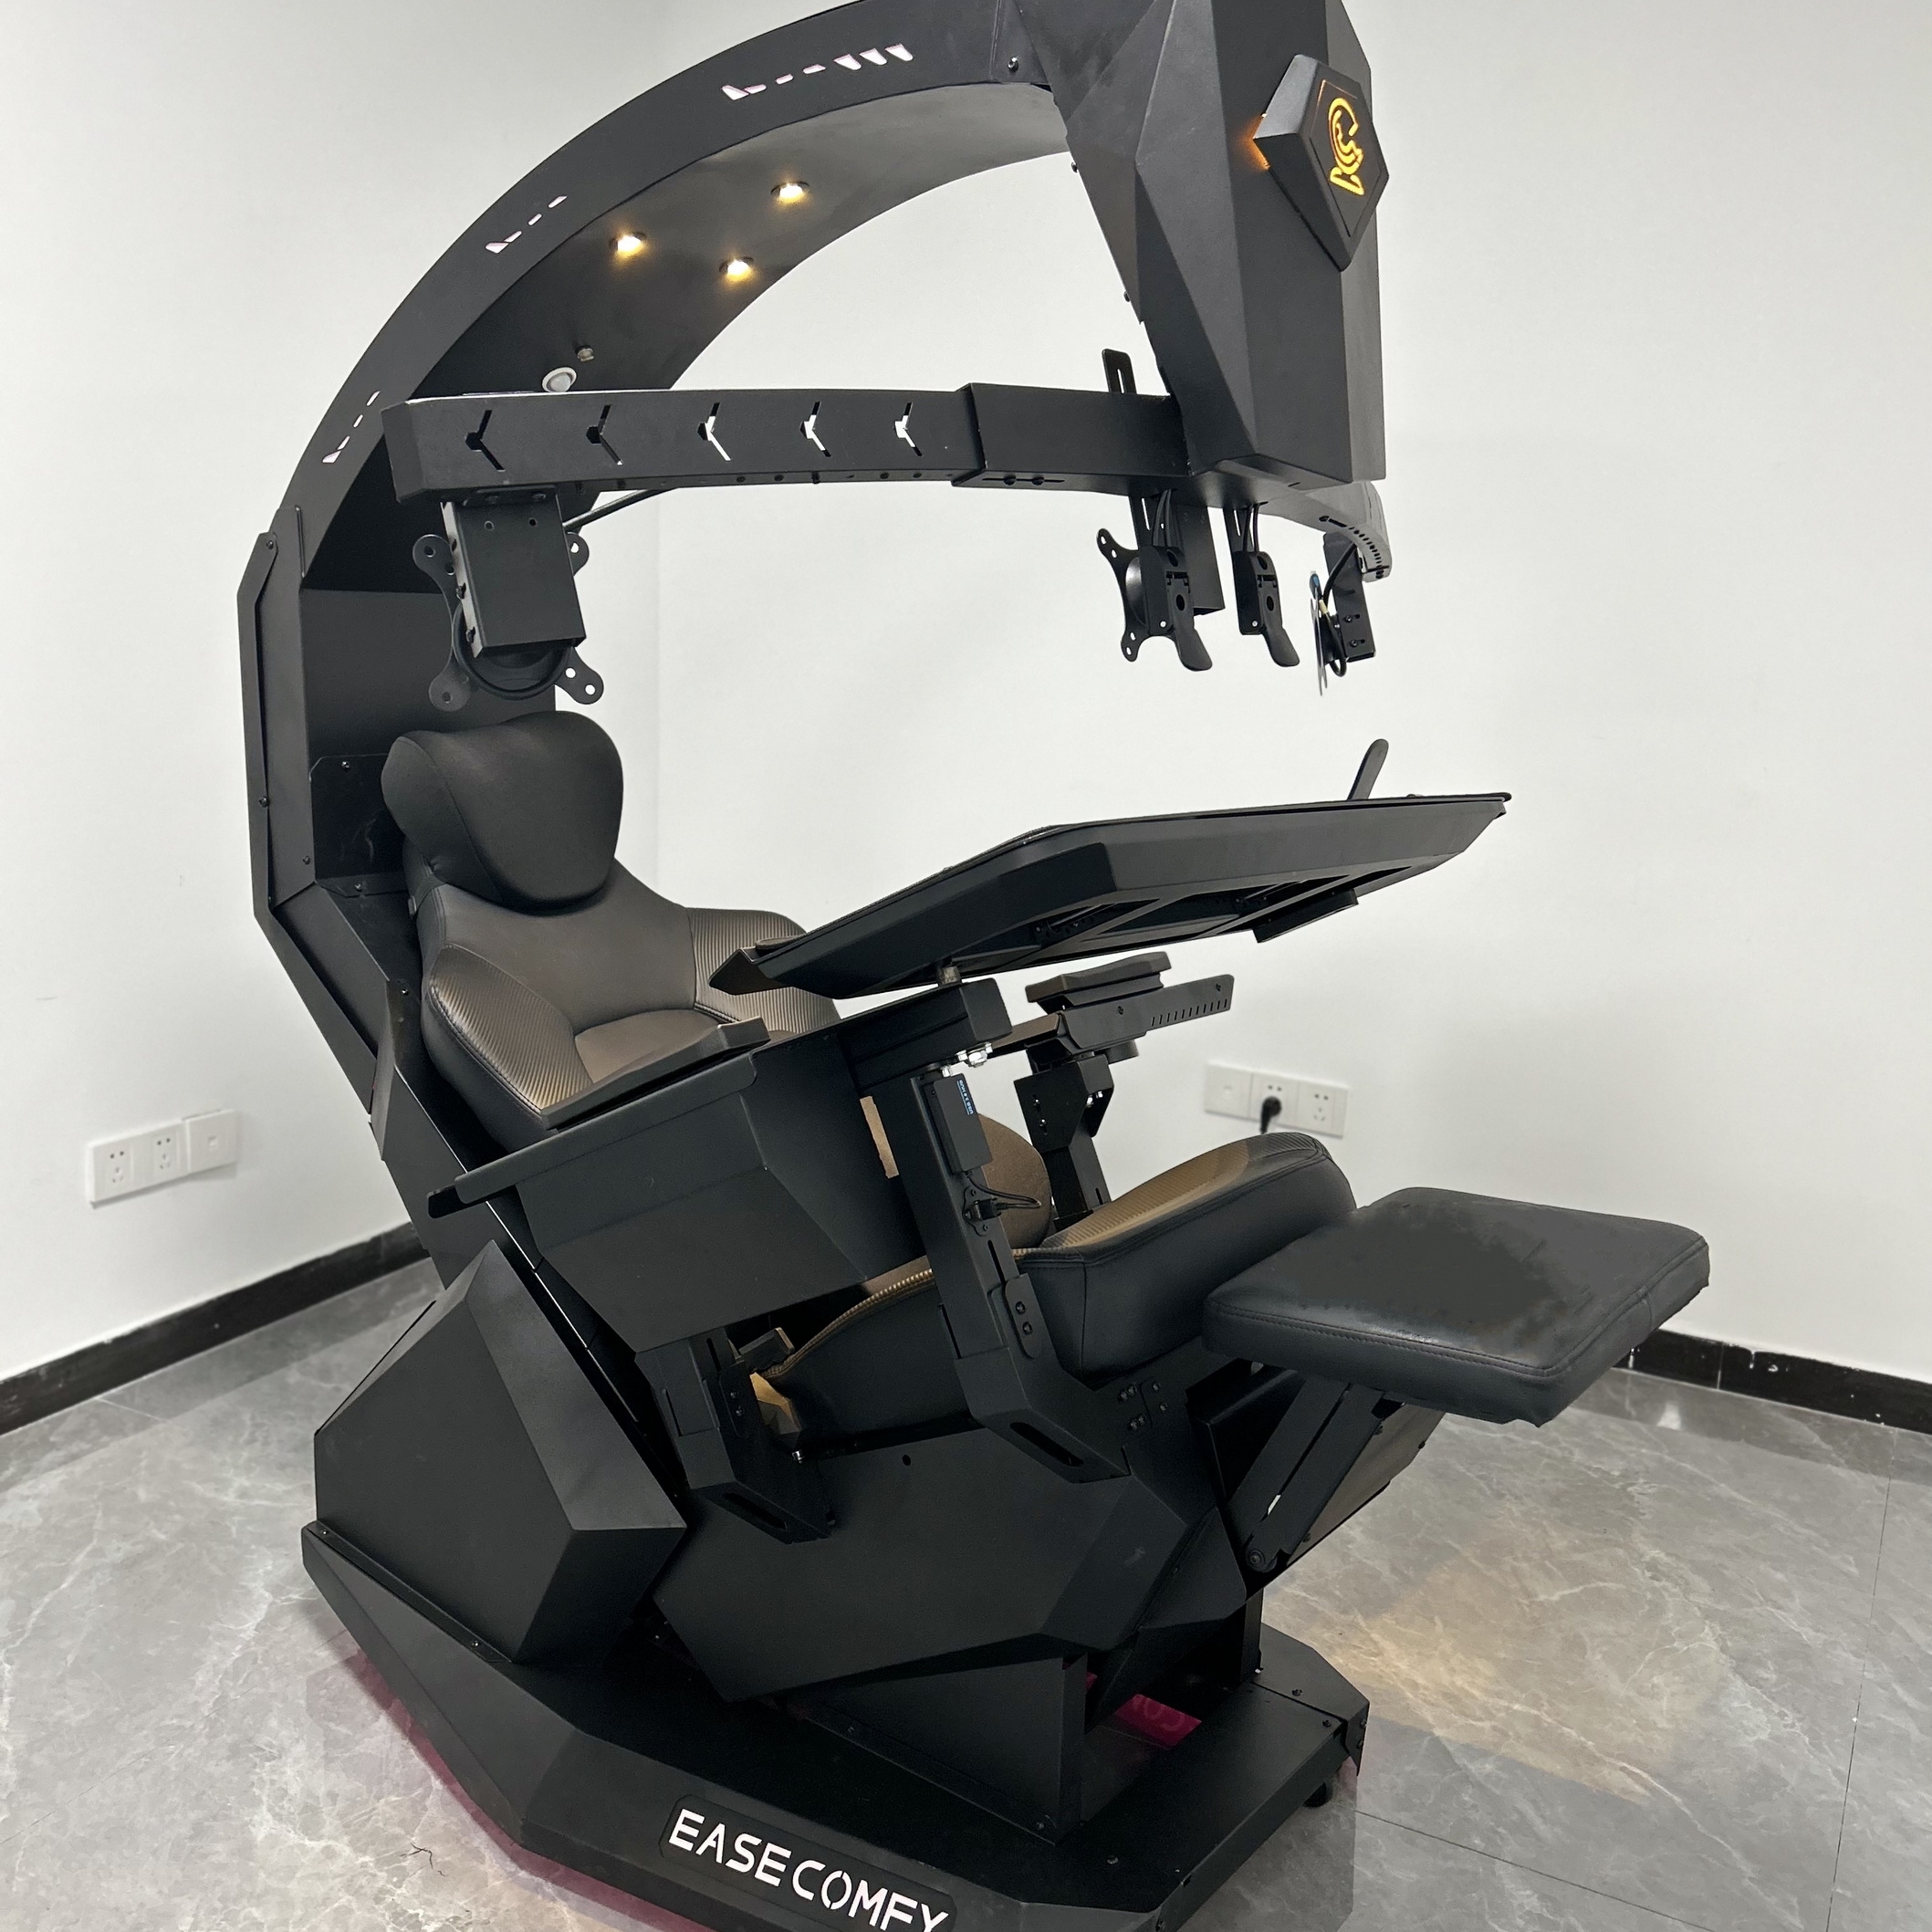 BLACK FRIDAY OFFER EASE COMFY T2 Throne Chair cockpit full functional easy afford quick install & adjustable support multi monitor zero gravity chair cockpit